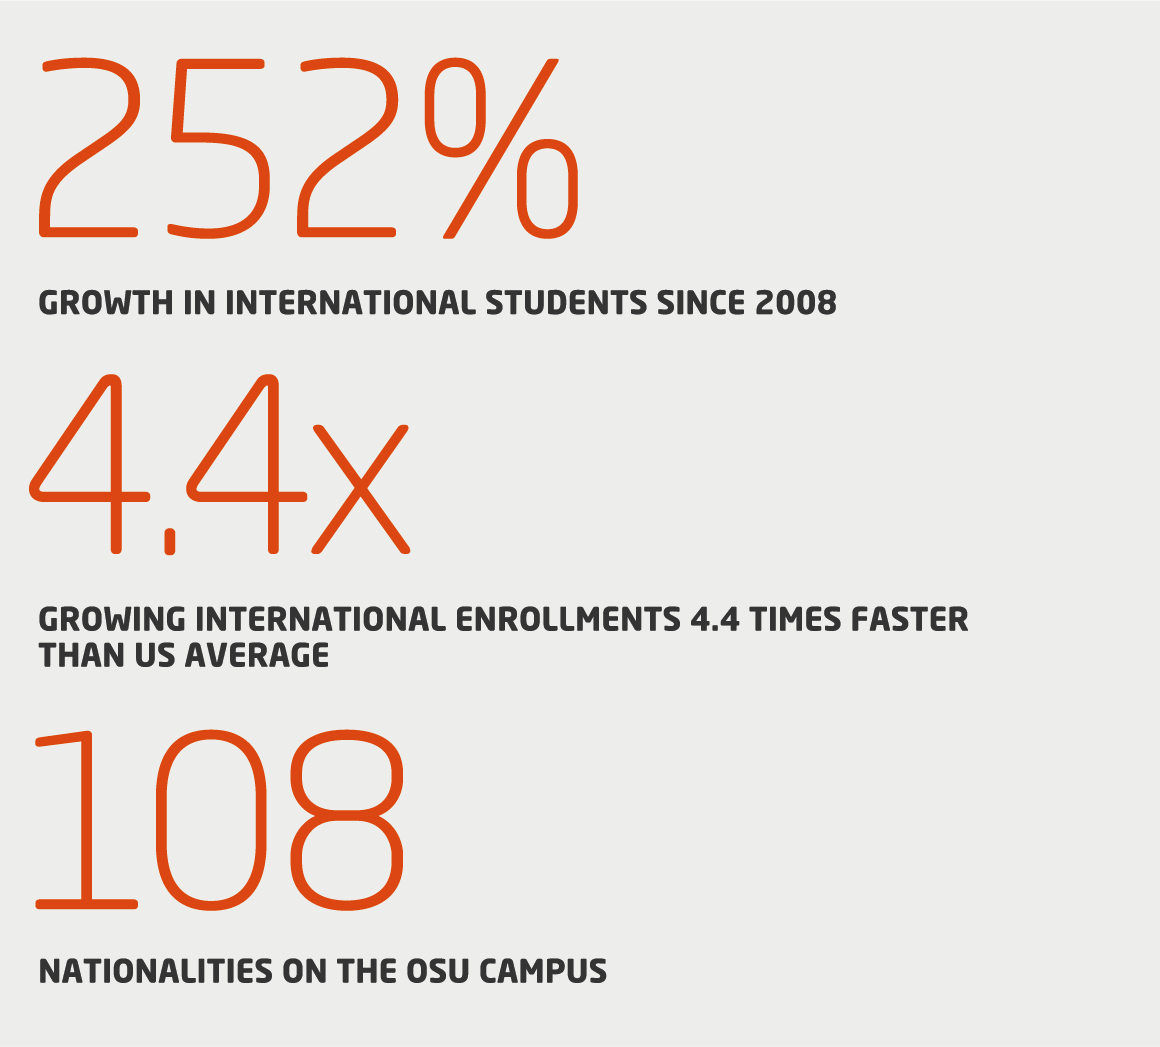 Infographic showing 252% growth in international students at Oregon State University since 2008, outpacing average US university growth by factor of 4.4. 108 nationalities on OSU campus.